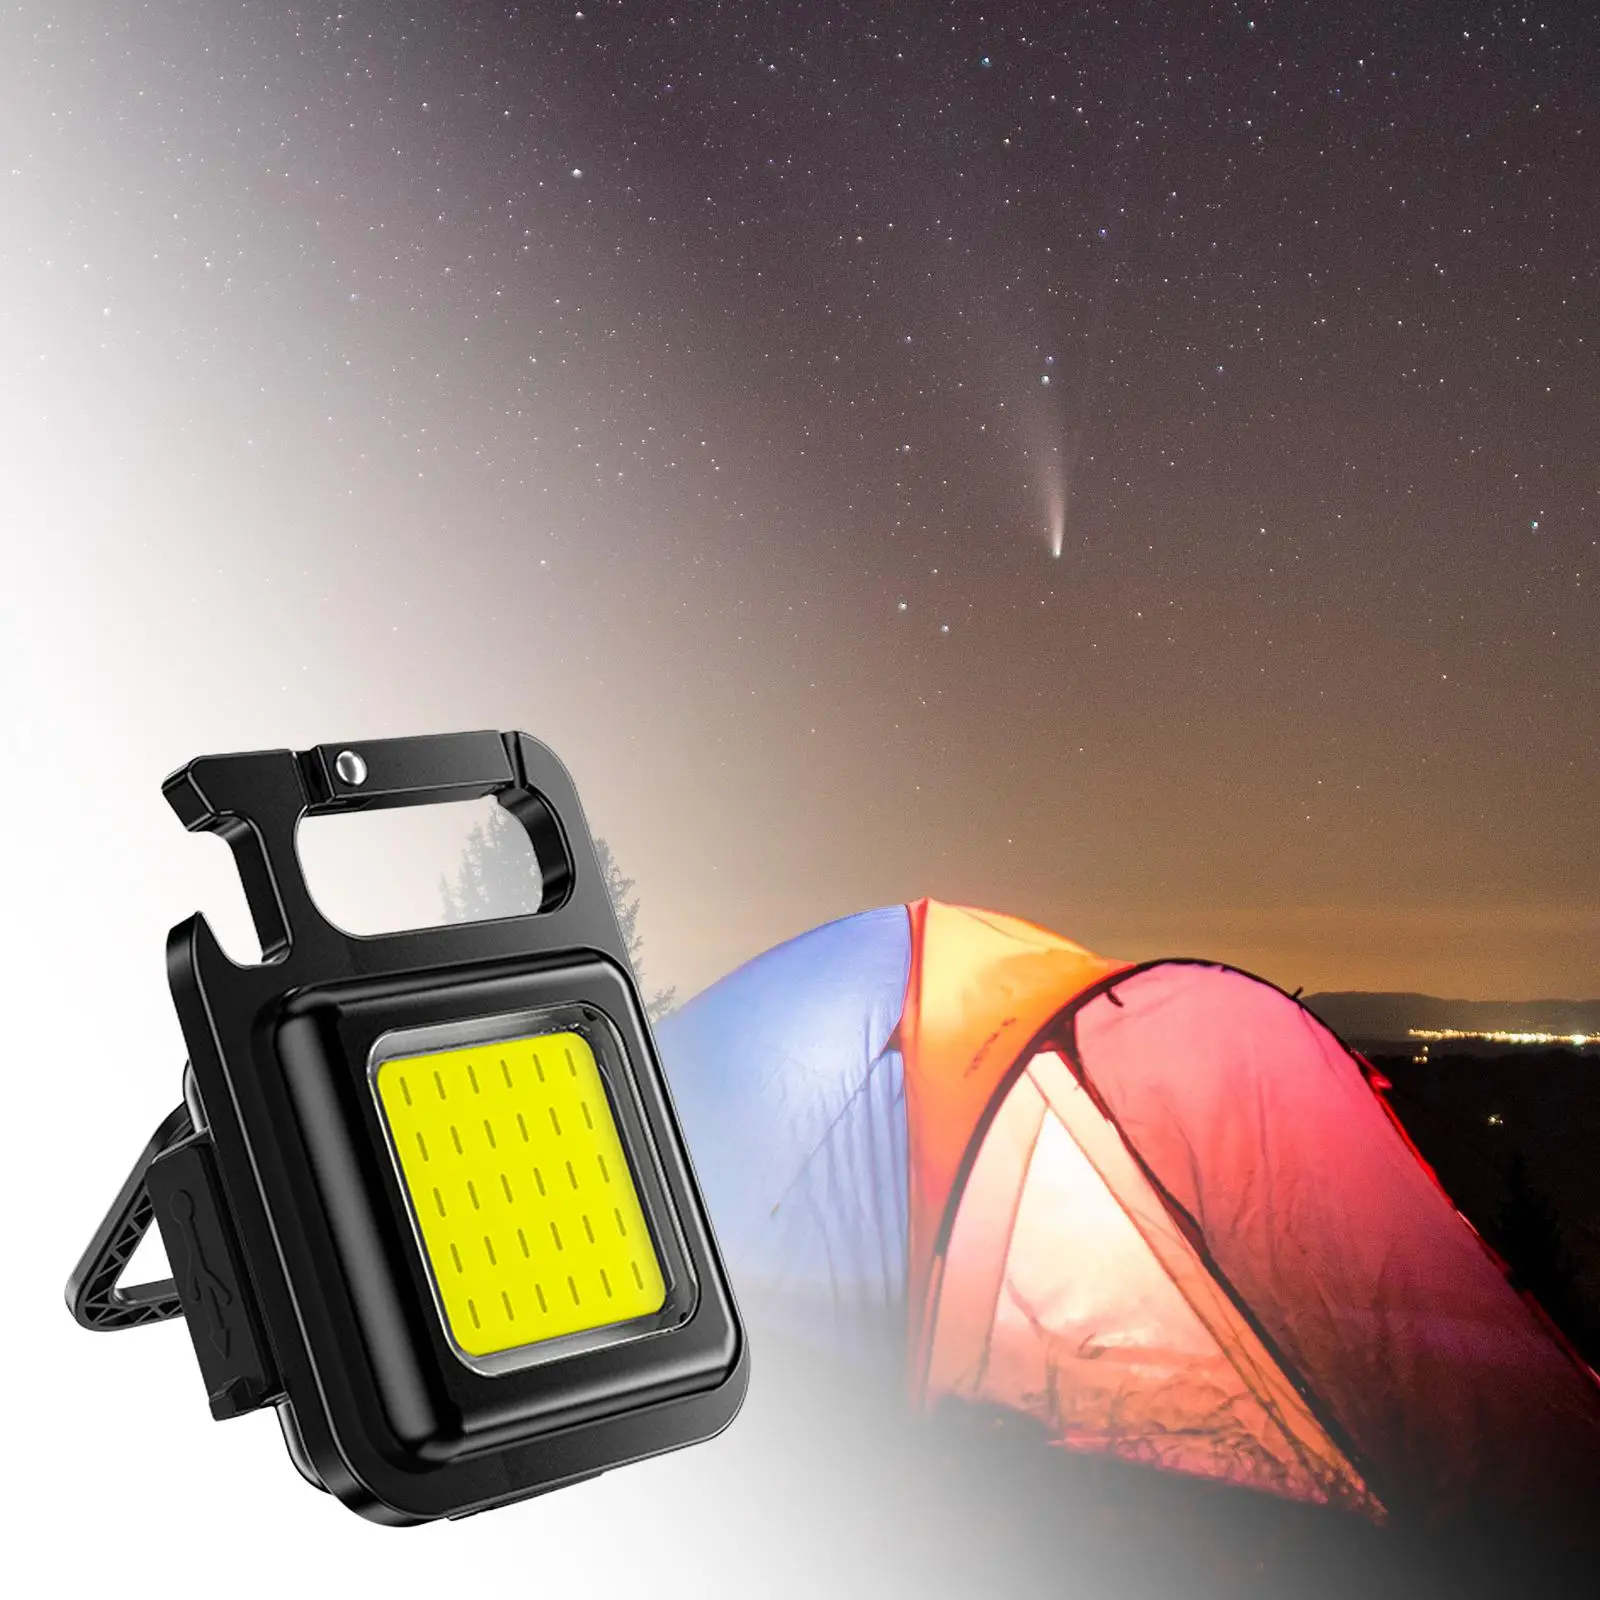 Portable COB Keychain Flashlight Lamp USB Rechargeable Waterproof Bottle Opener Torch Emergency Light for Fishing Work Hiking